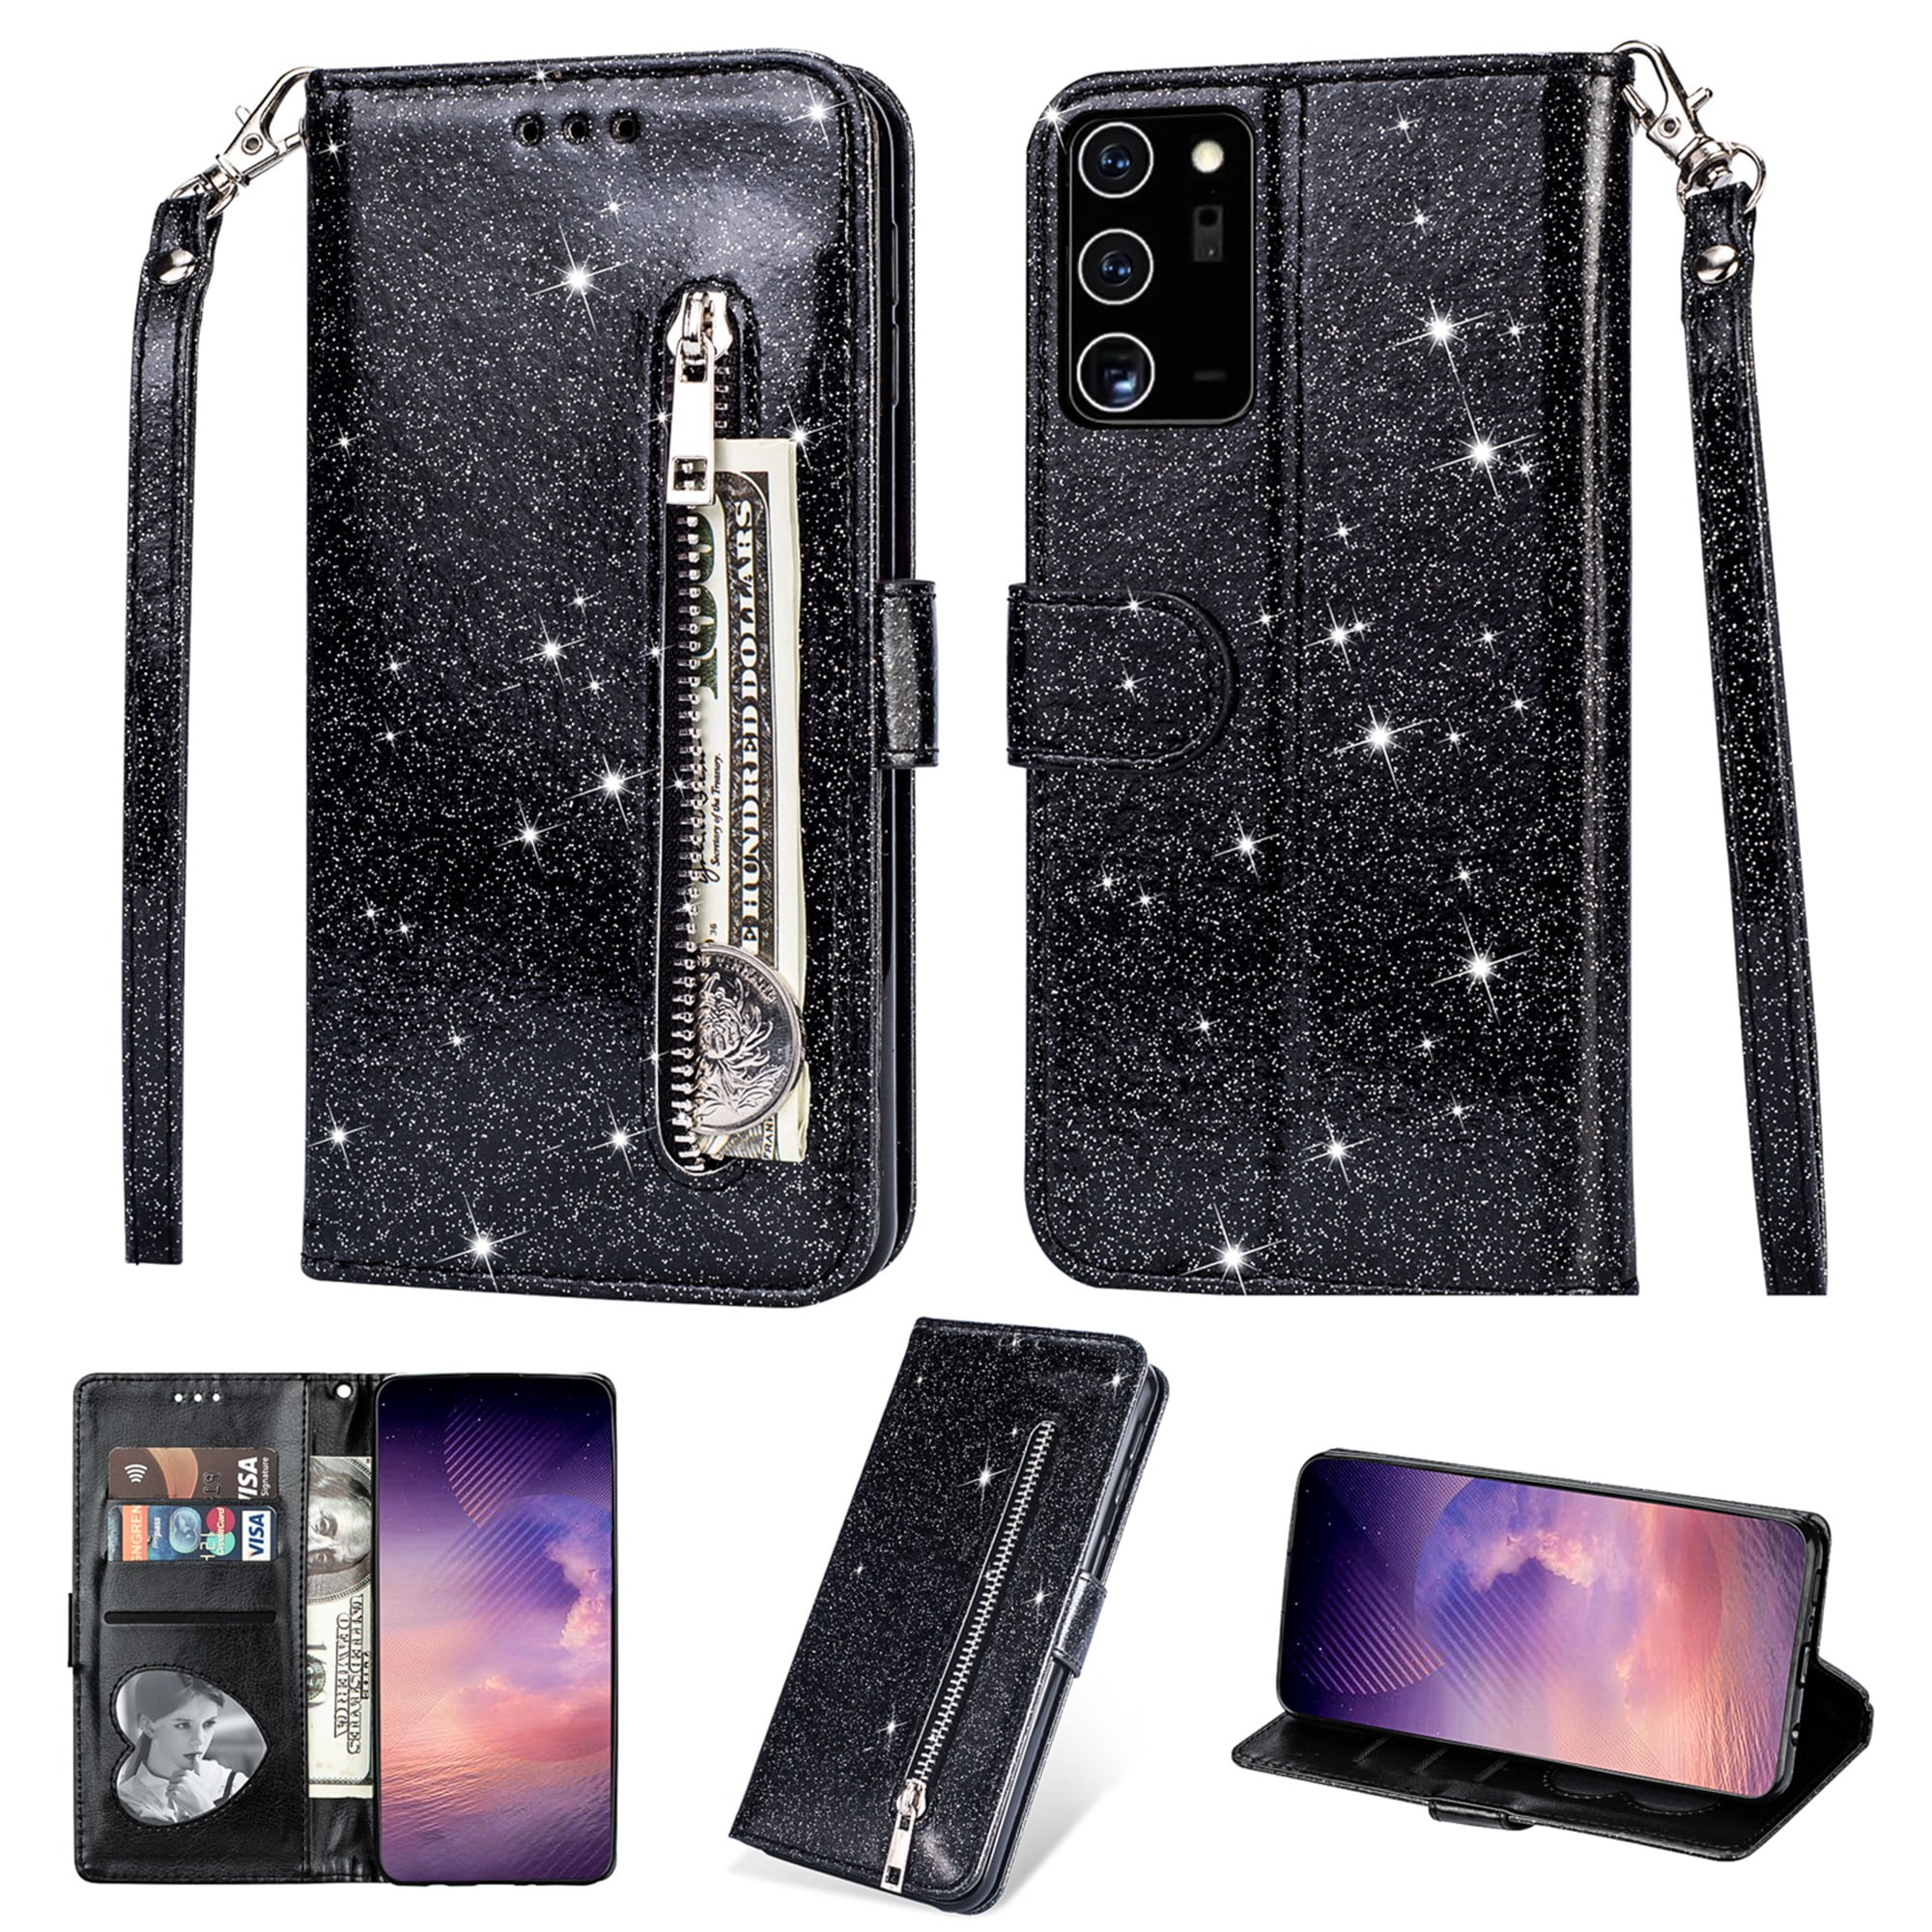 Miagon Zipper Glitter Wallet Case for Huawei P30,Bling Flip PU Leather Folio Cover Shiny Magnetic Girls Stand Bumper with 9 Card Slots and Wrist Strap,Black 